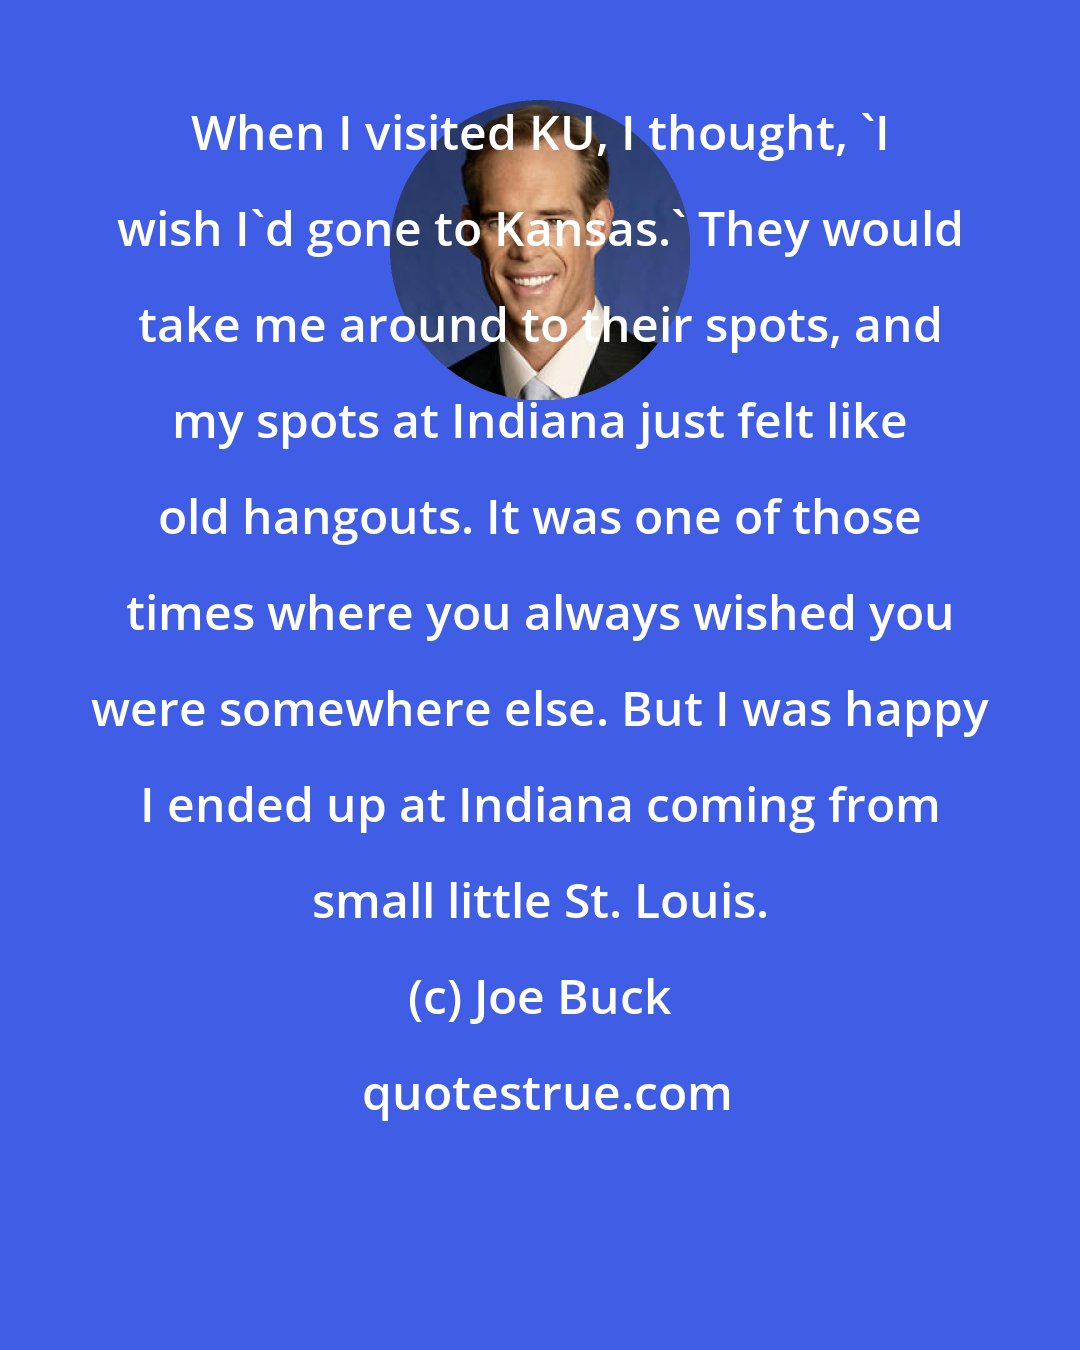 Joe Buck: When I visited KU, I thought, 'I wish I'd gone to Kansas.' They would take me around to their spots, and my spots at Indiana just felt like old hangouts. It was one of those times where you always wished you were somewhere else. But I was happy I ended up at Indiana coming from small little St. Louis.